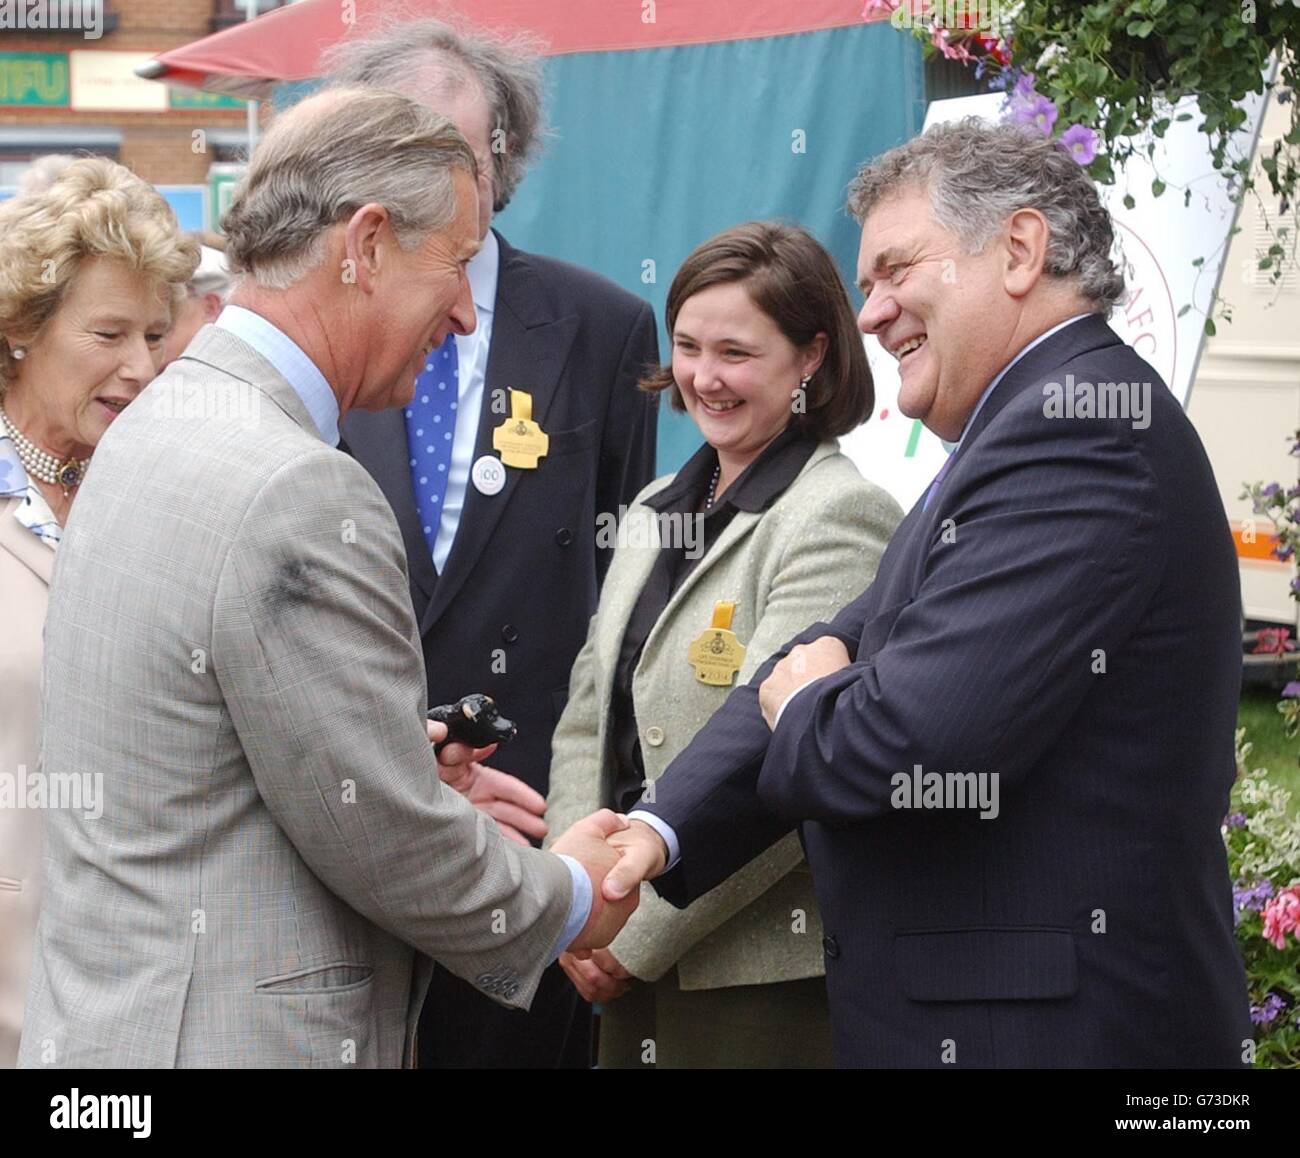 The Prince of Wales (left) meets singer and Comedian Max Boyce during his visit to the Royal Welsh Show Wales. Officially opening the event in Builth Wells, now in its centenary year, Charles said he would like to see consumers told how and where their food was grown. The Royal Welsh Show is a four-day agricultural extravaganza showcasing the best of the principality's rich rural industry. Held in July every year at its permanent show ground in Builth Wells, the event attracts more than 200,000 visitors annually. Stock Photo